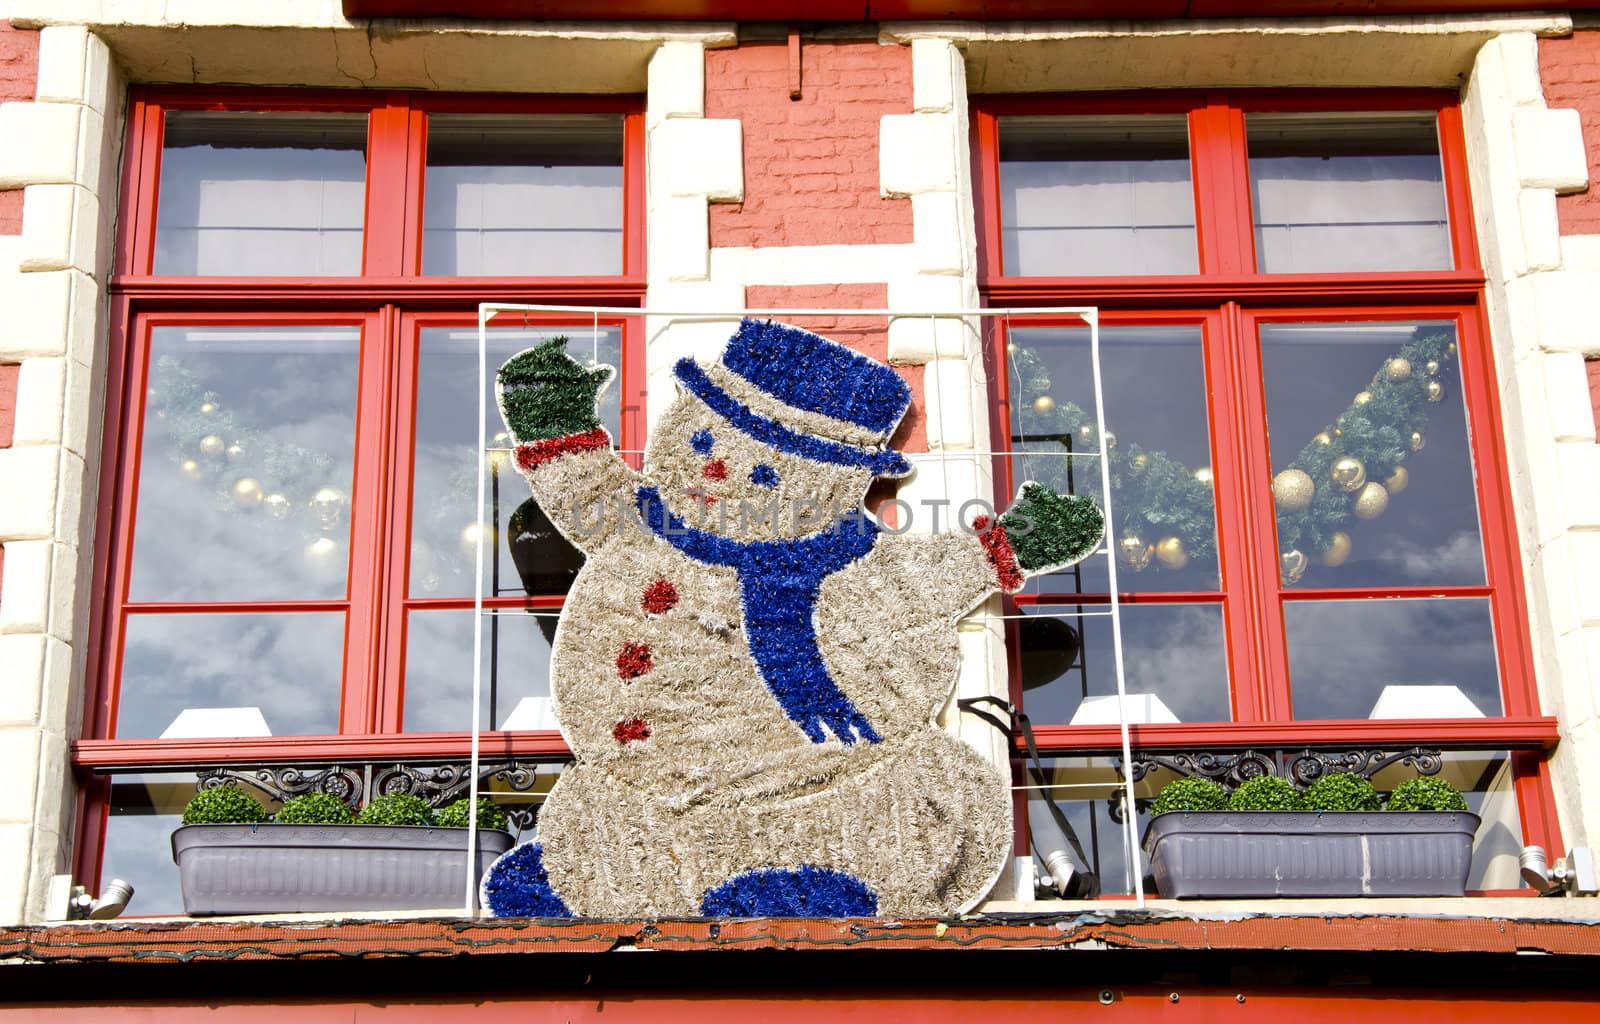 Snowman on the old town window in Belgium